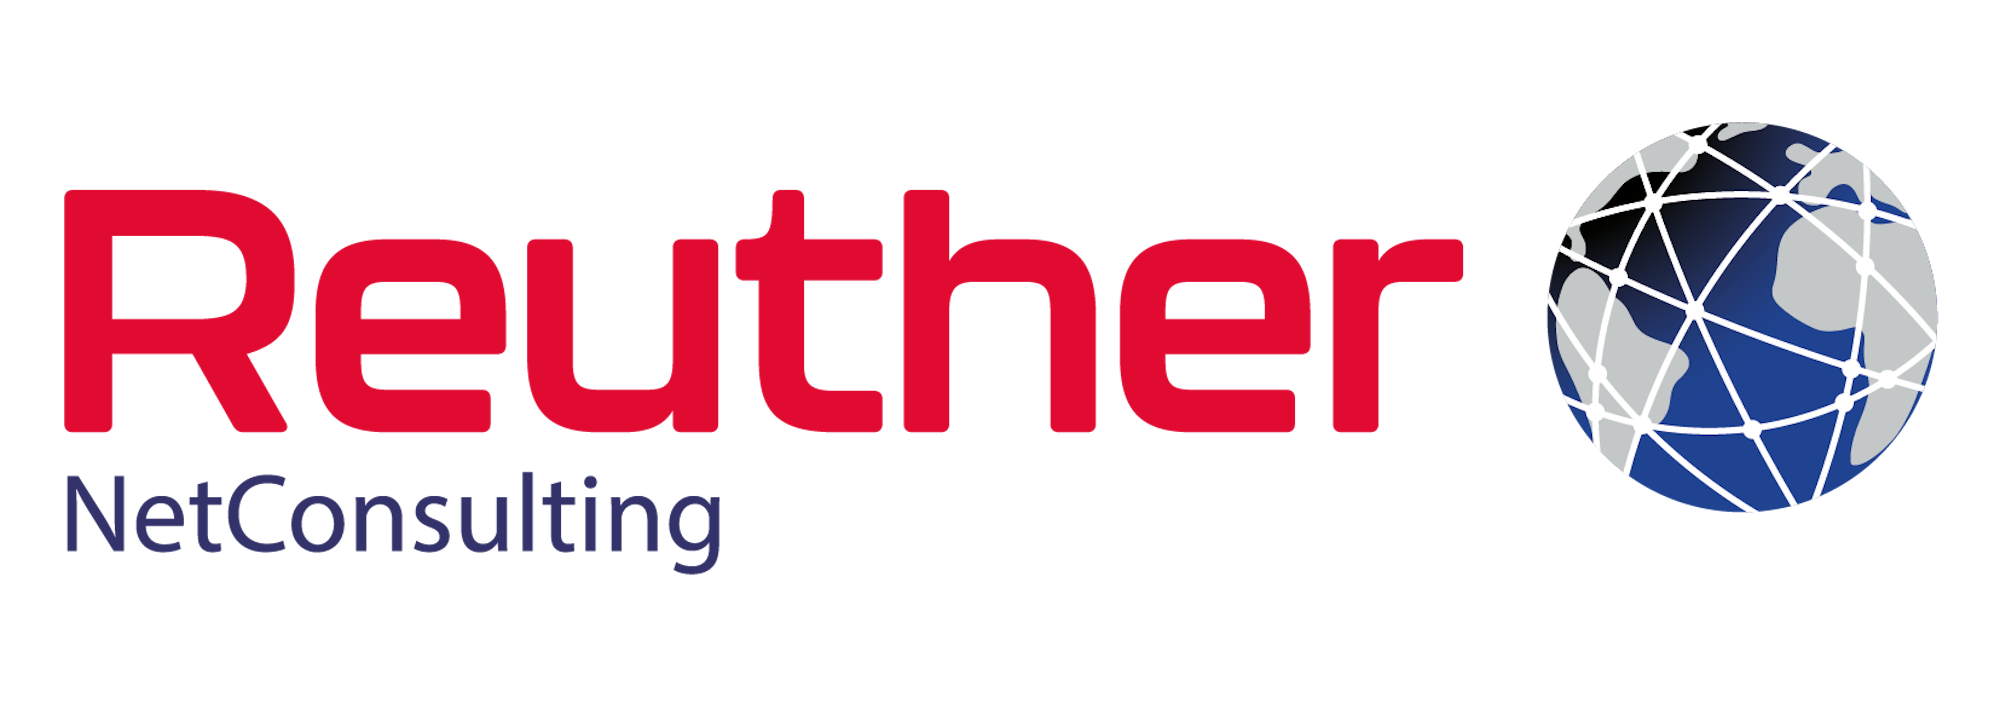 Reuther NetConsulting